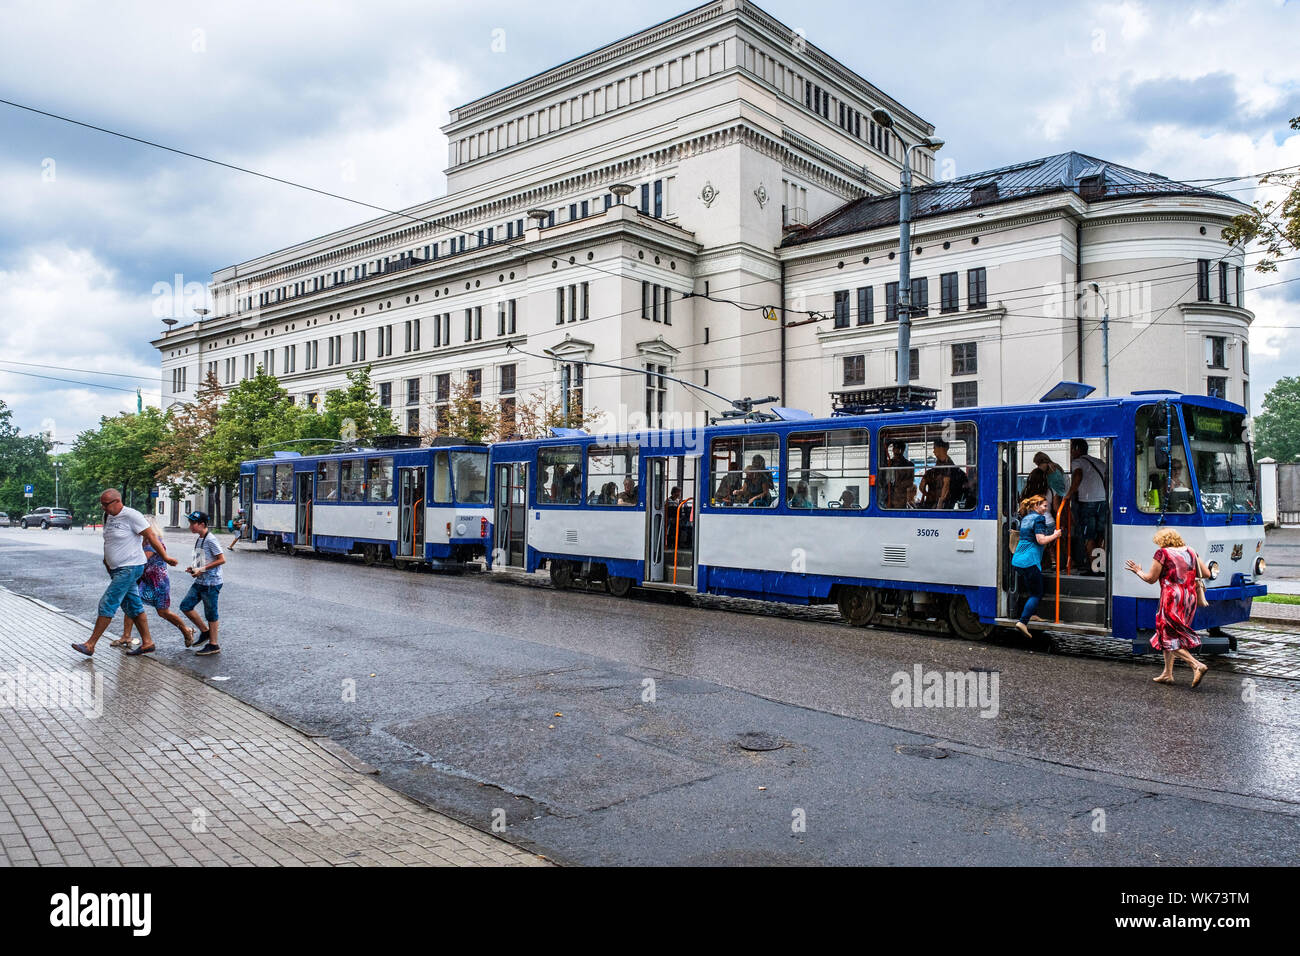 Latvia: Riga. Tram in front of the National Opera on a rainy day. The Latvian National Opera (LNO, Latvijas Nacion&;l&; opera), situated in the histor Stock Photo